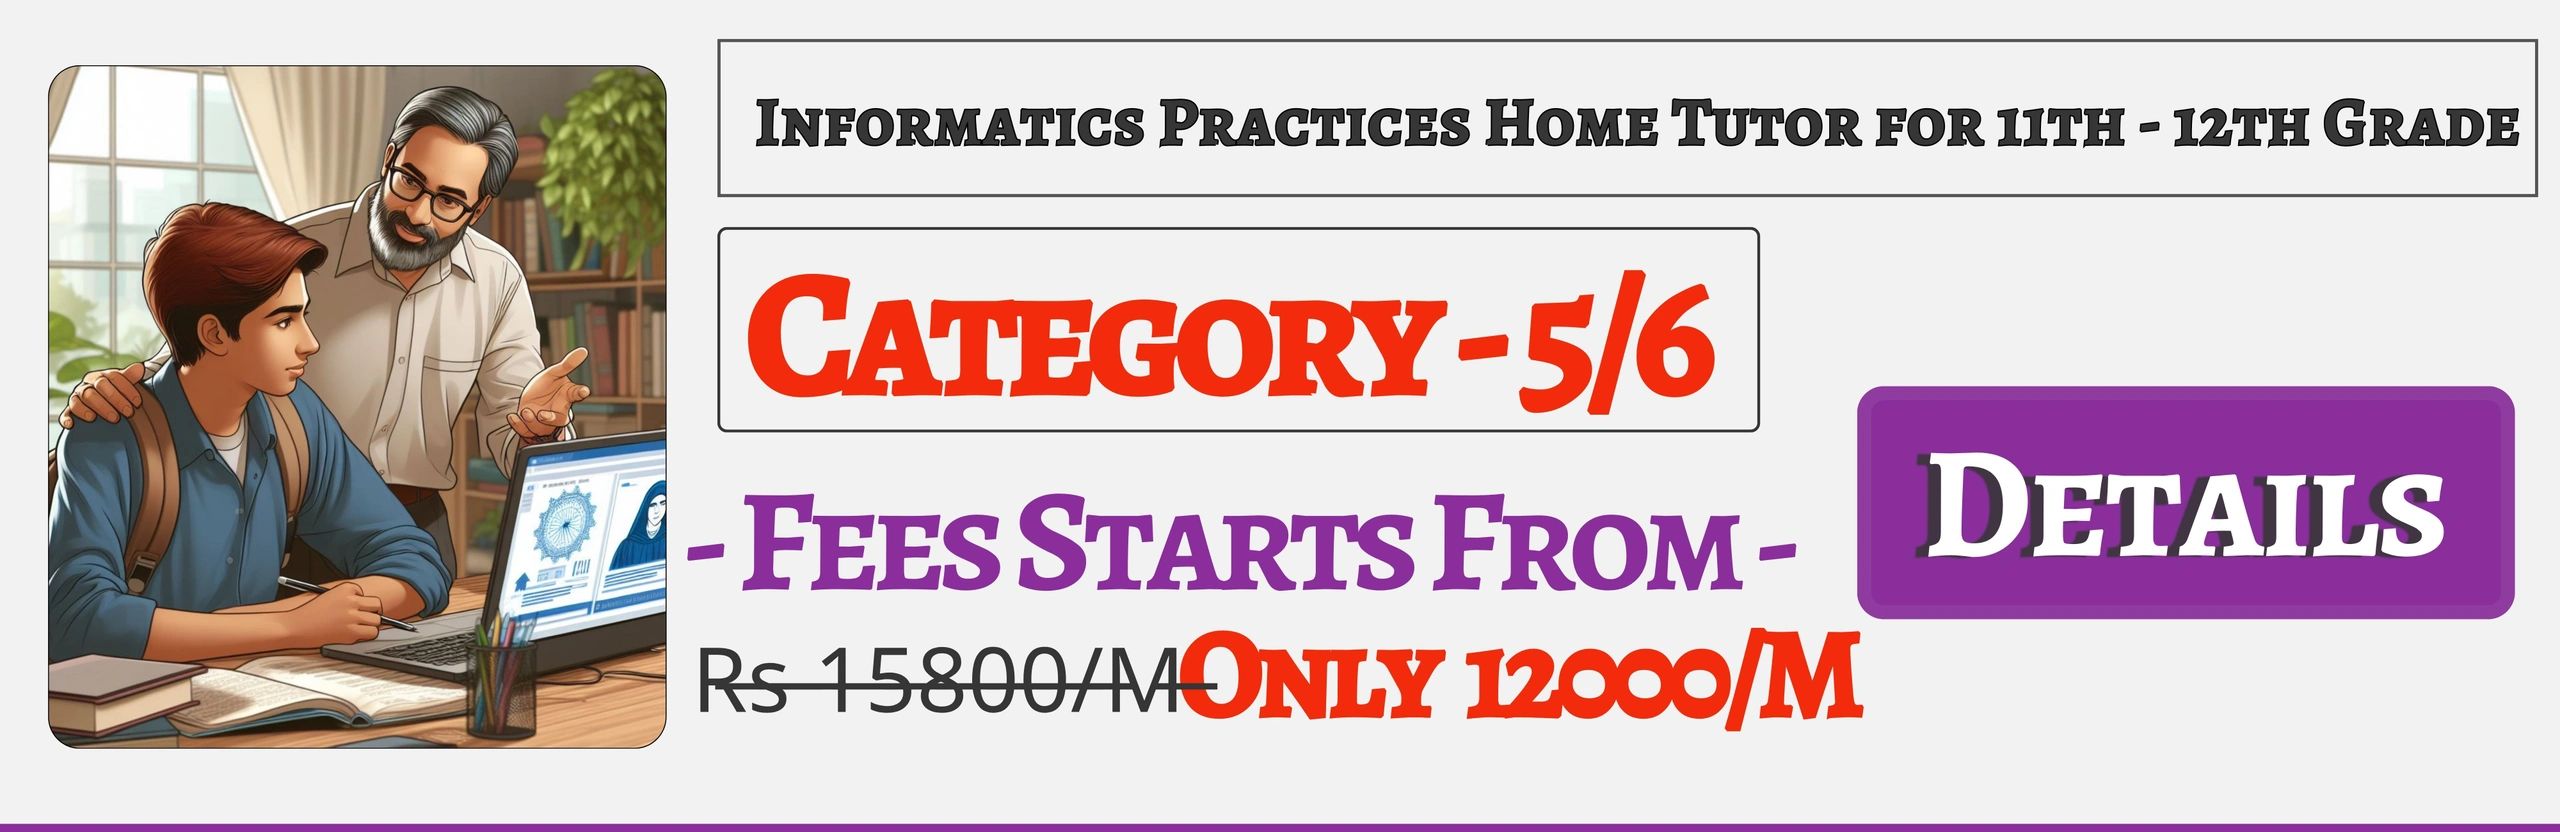 Book Best Nearby Informatics Practices Home Tuition Tutors For 11th & 12th Jaipur ,Fees Only 12000/M